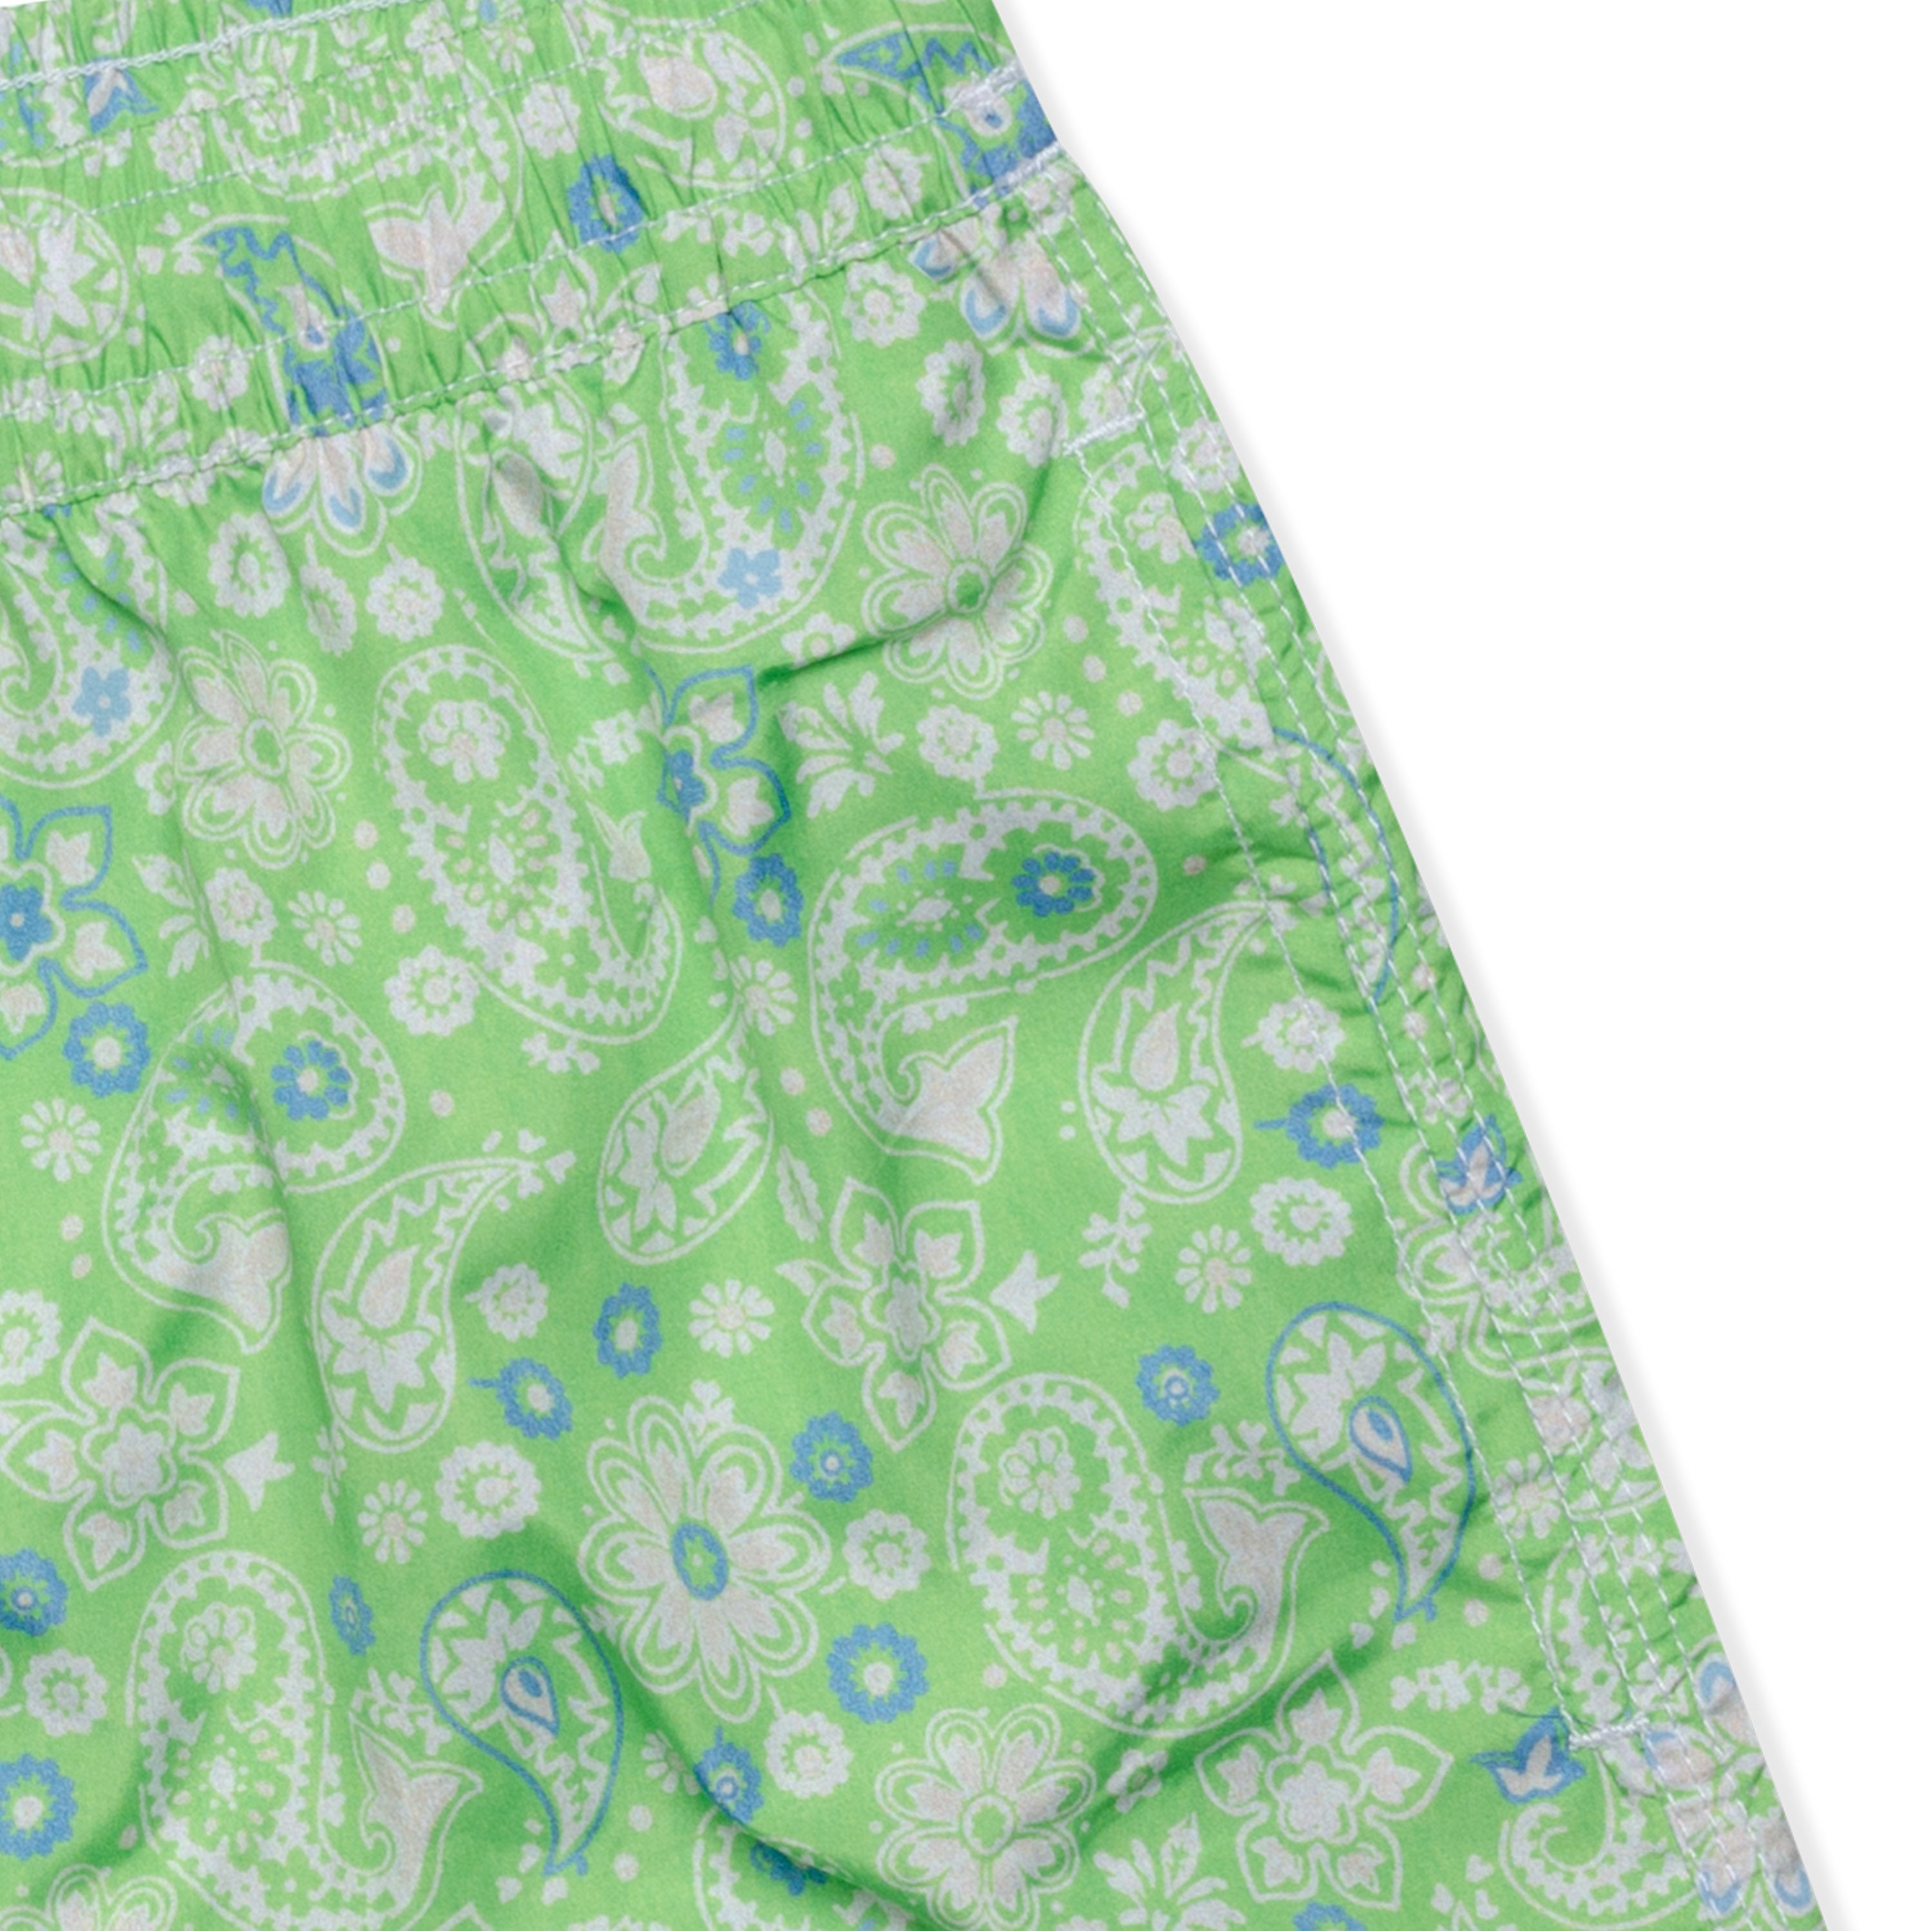 FEDELI Green Floral Paisley Printed Madeira Airstop Swim Shorts Trunks NEW 2XL FEDELI